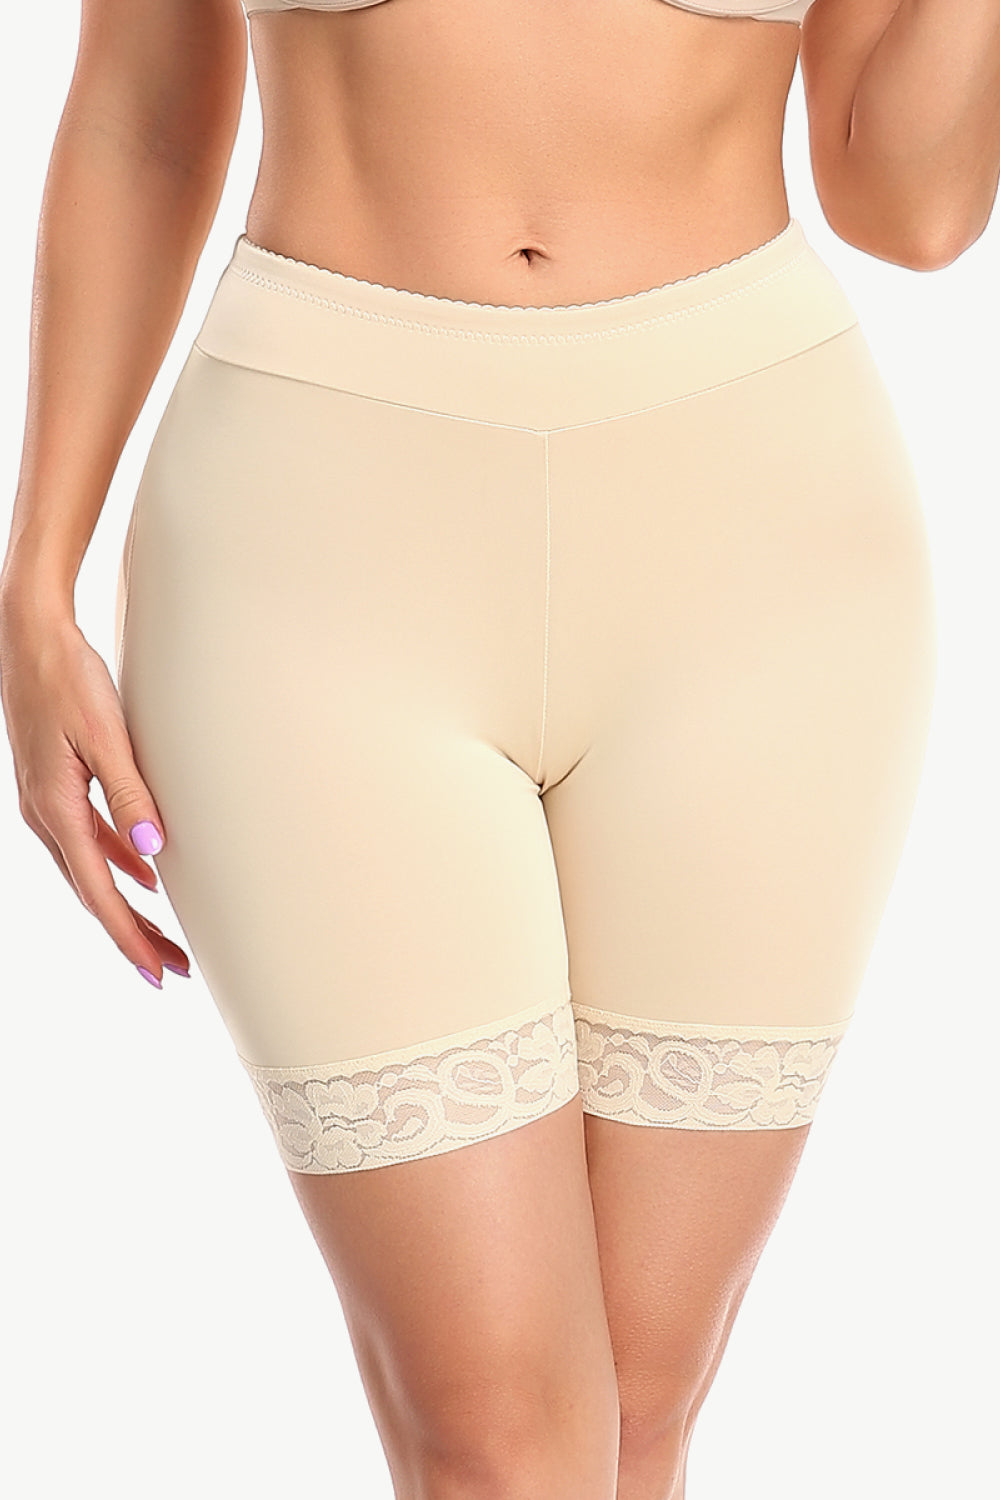 Full Size Lace Trim Lifting Pull-On Shaping Shorts - Shapewear - FITGGINS